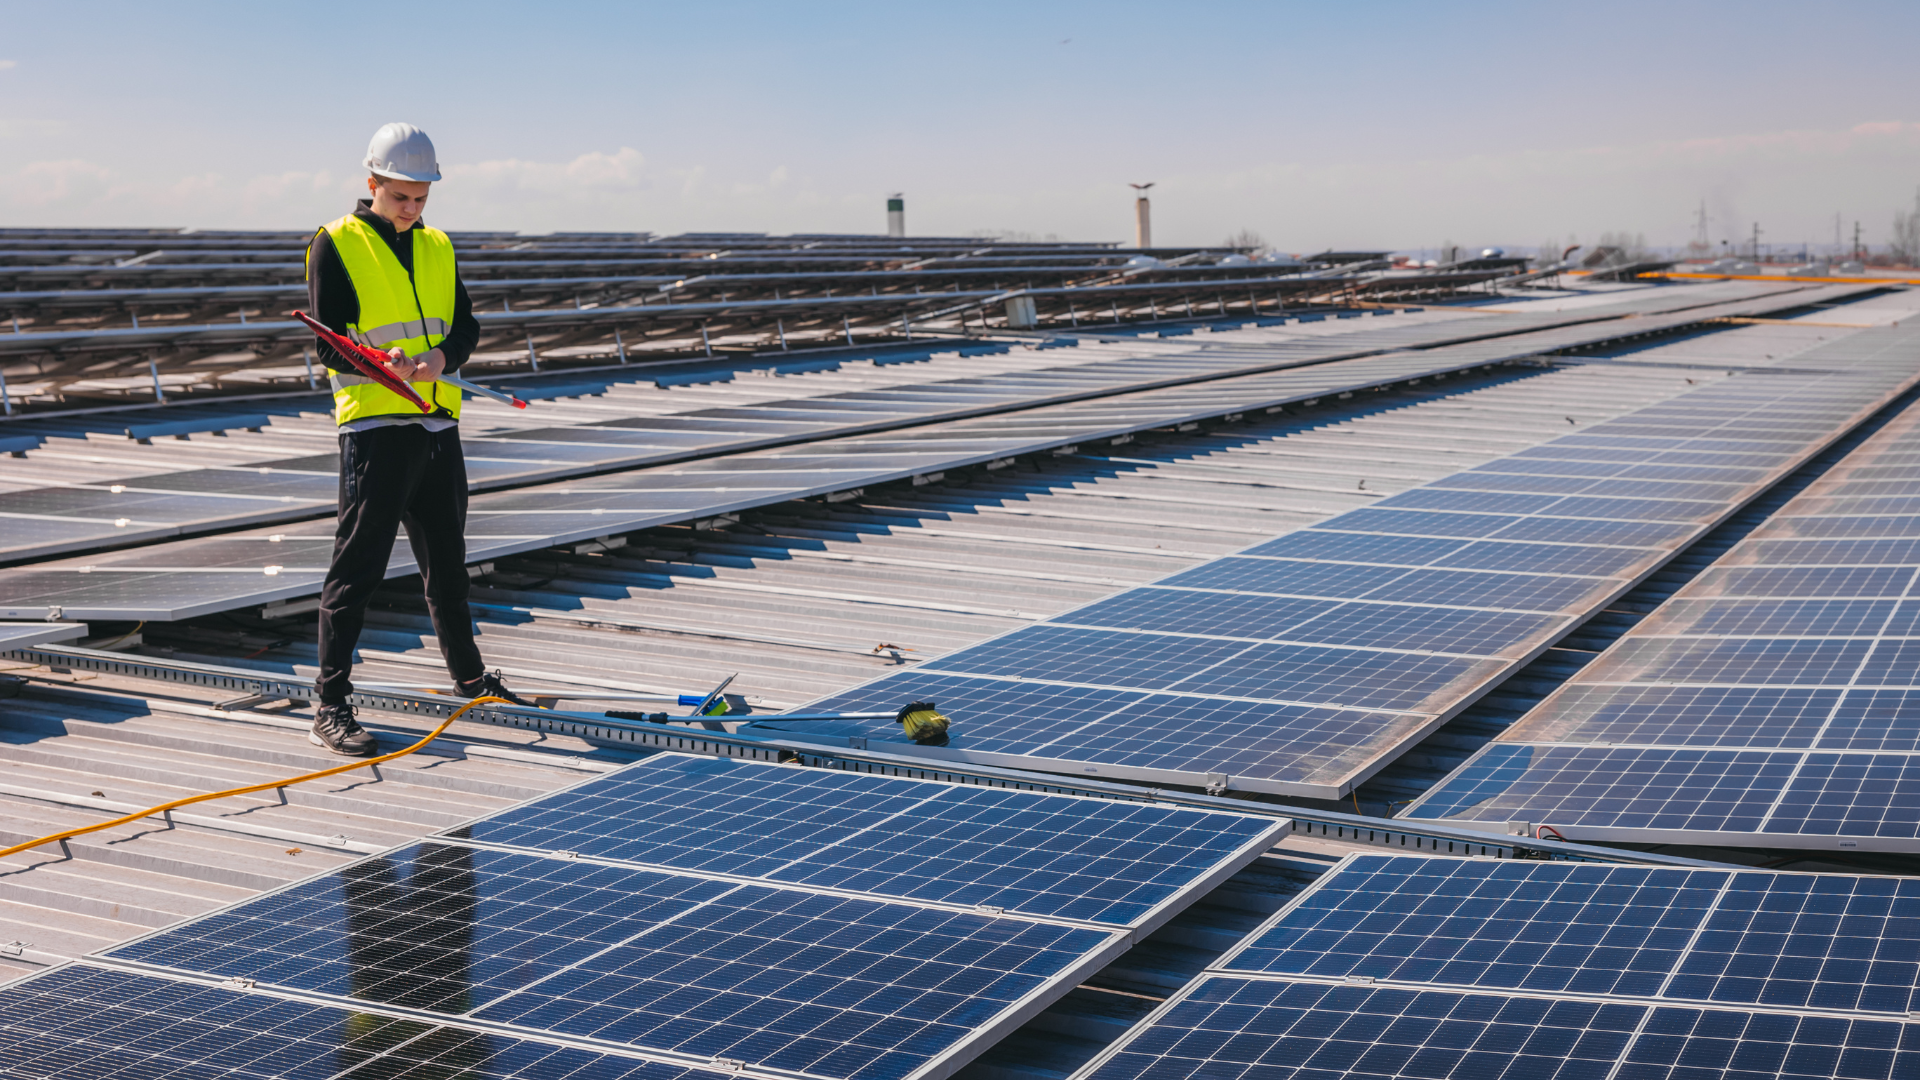 An engineer checking a field of solar panels